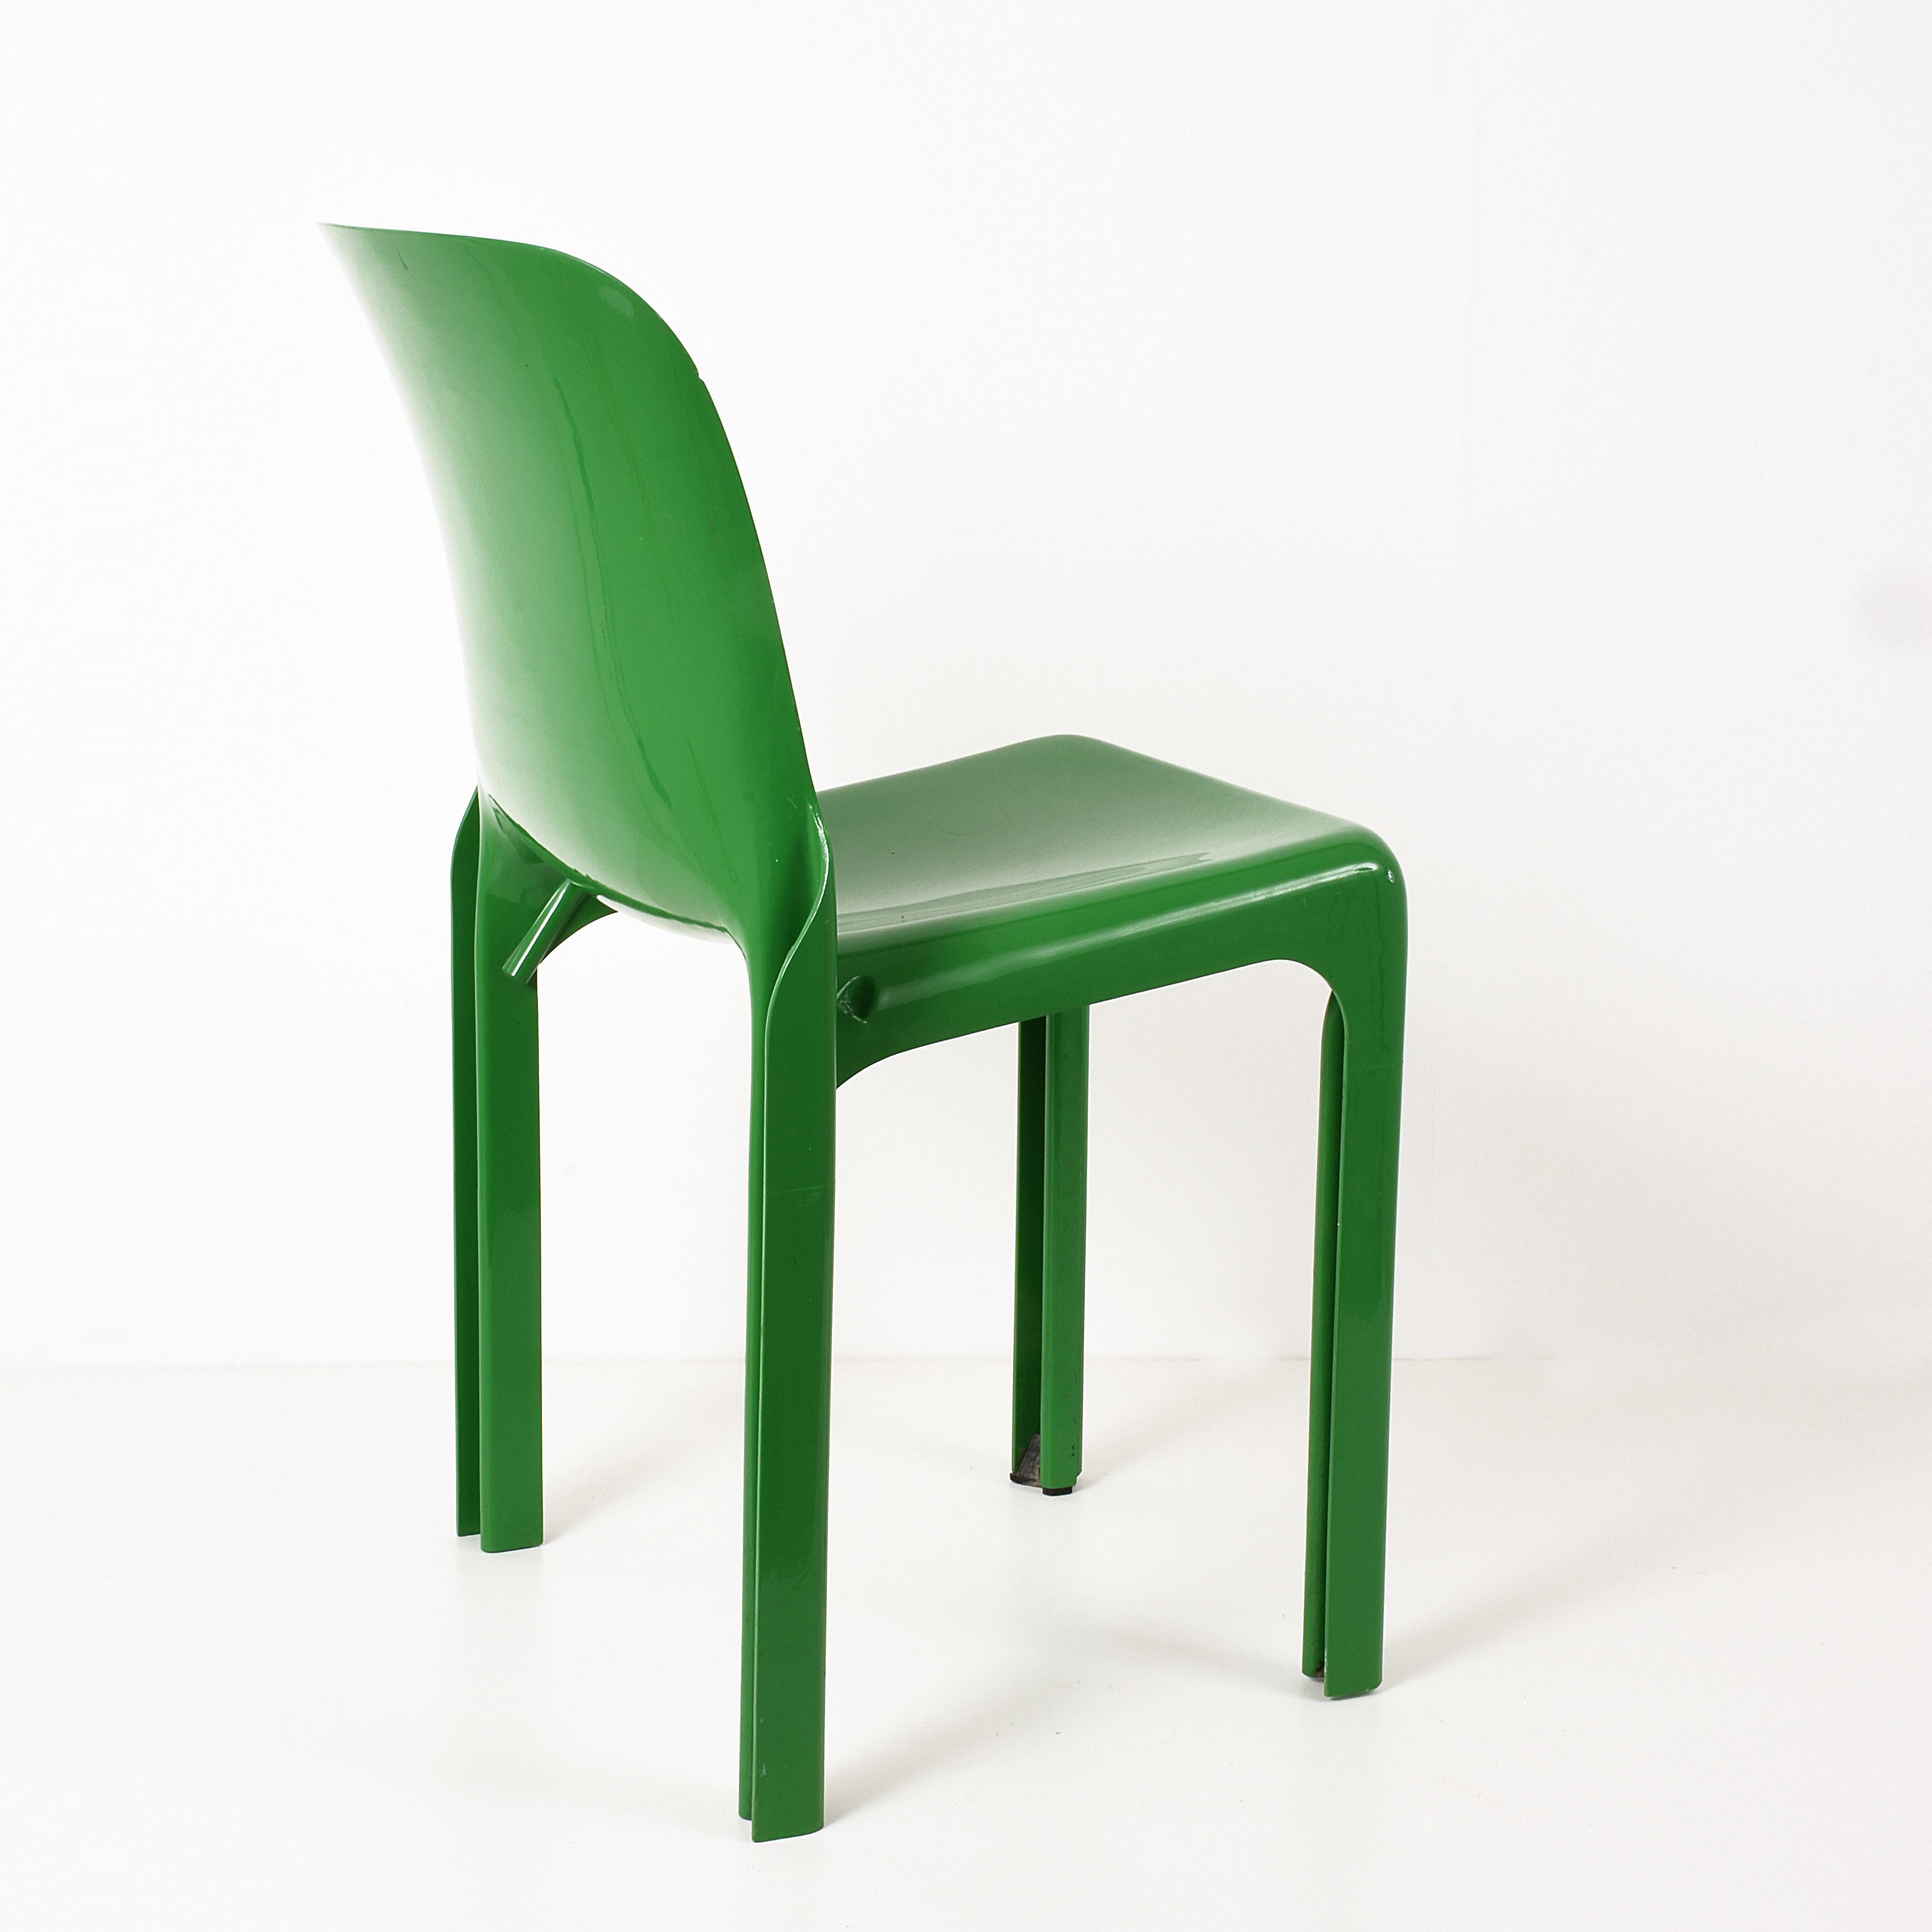 Particular for its green color, this chair by Vico Magistretti and realized by Artemide Milano in 1969.